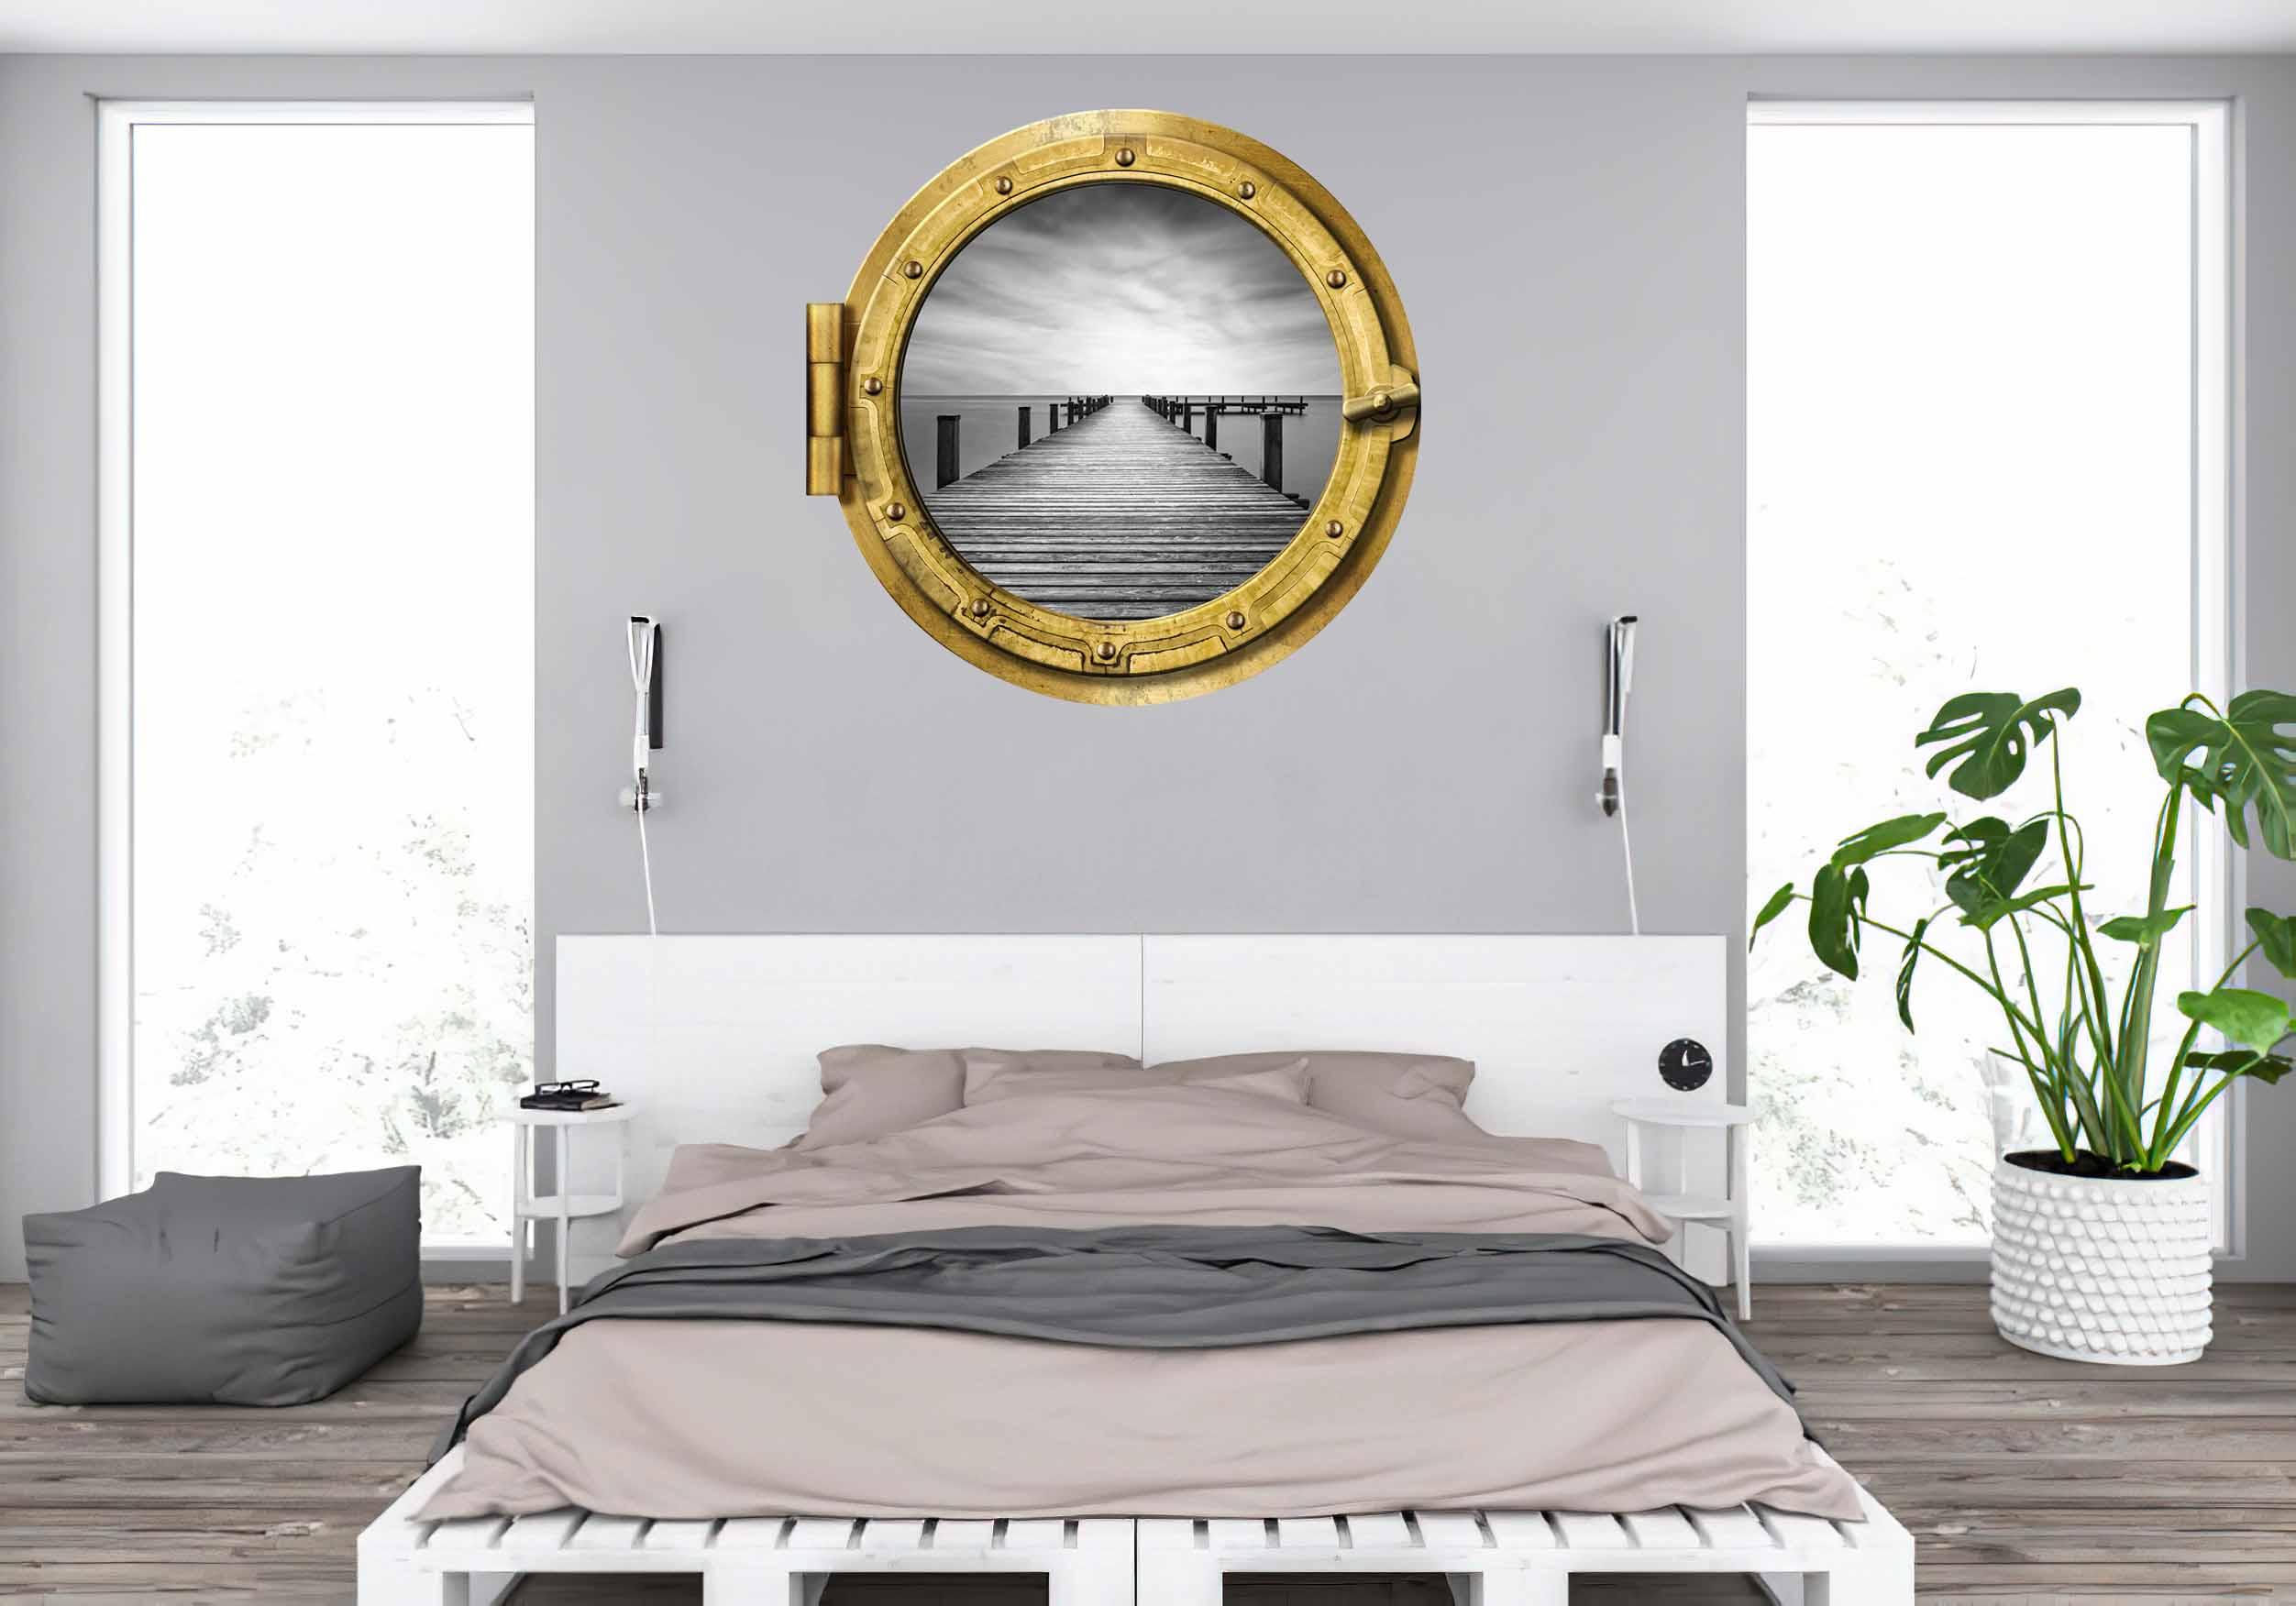 BW Dock Over waters #009, Window Decal, removable wallpaper Home Decor